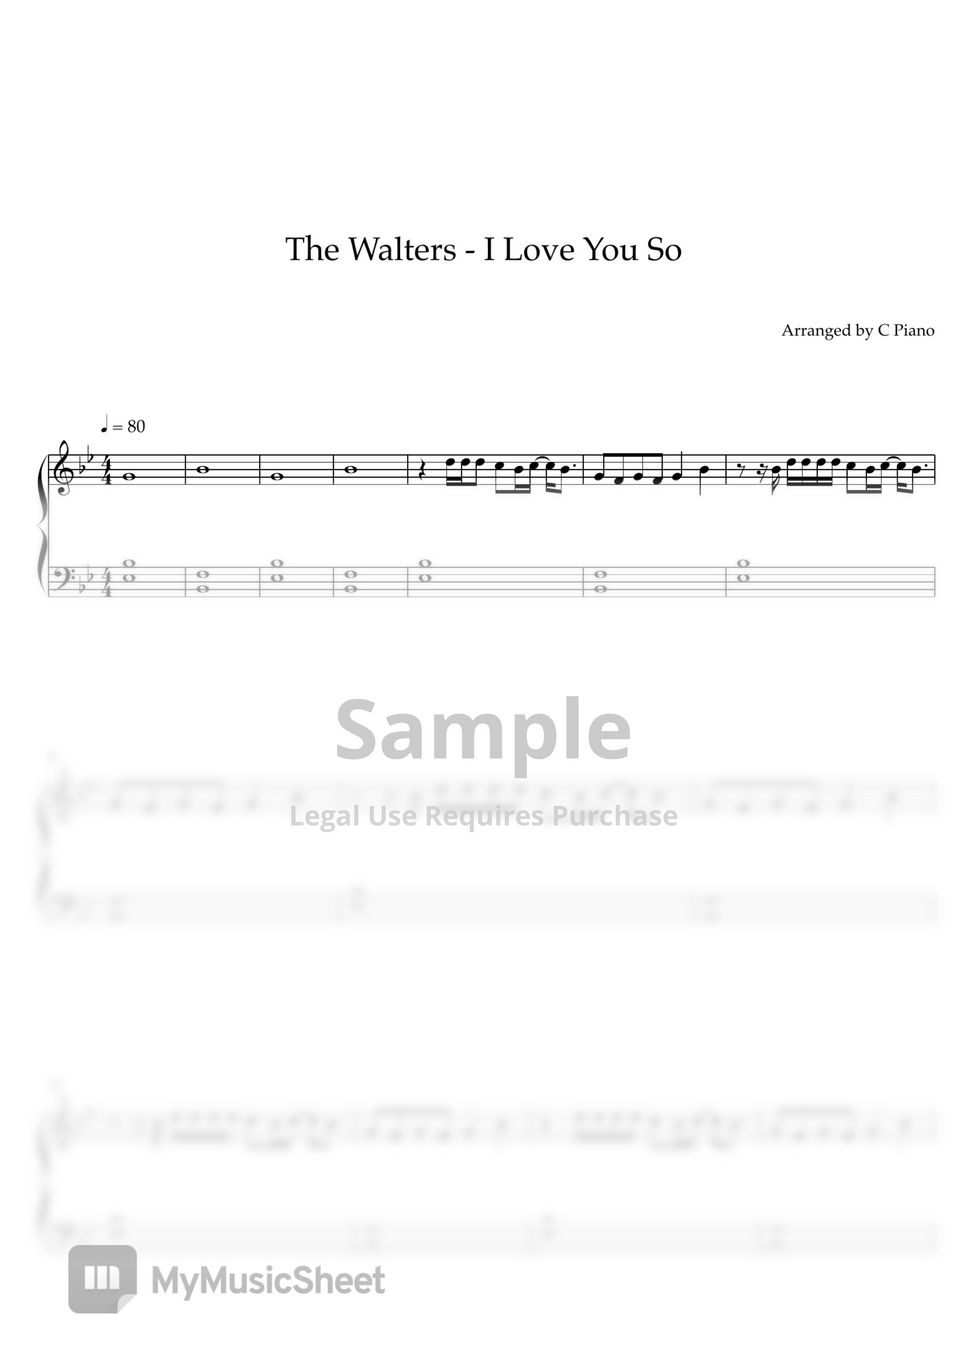 The Walters - I Love You So (Easy Version) by C Piano